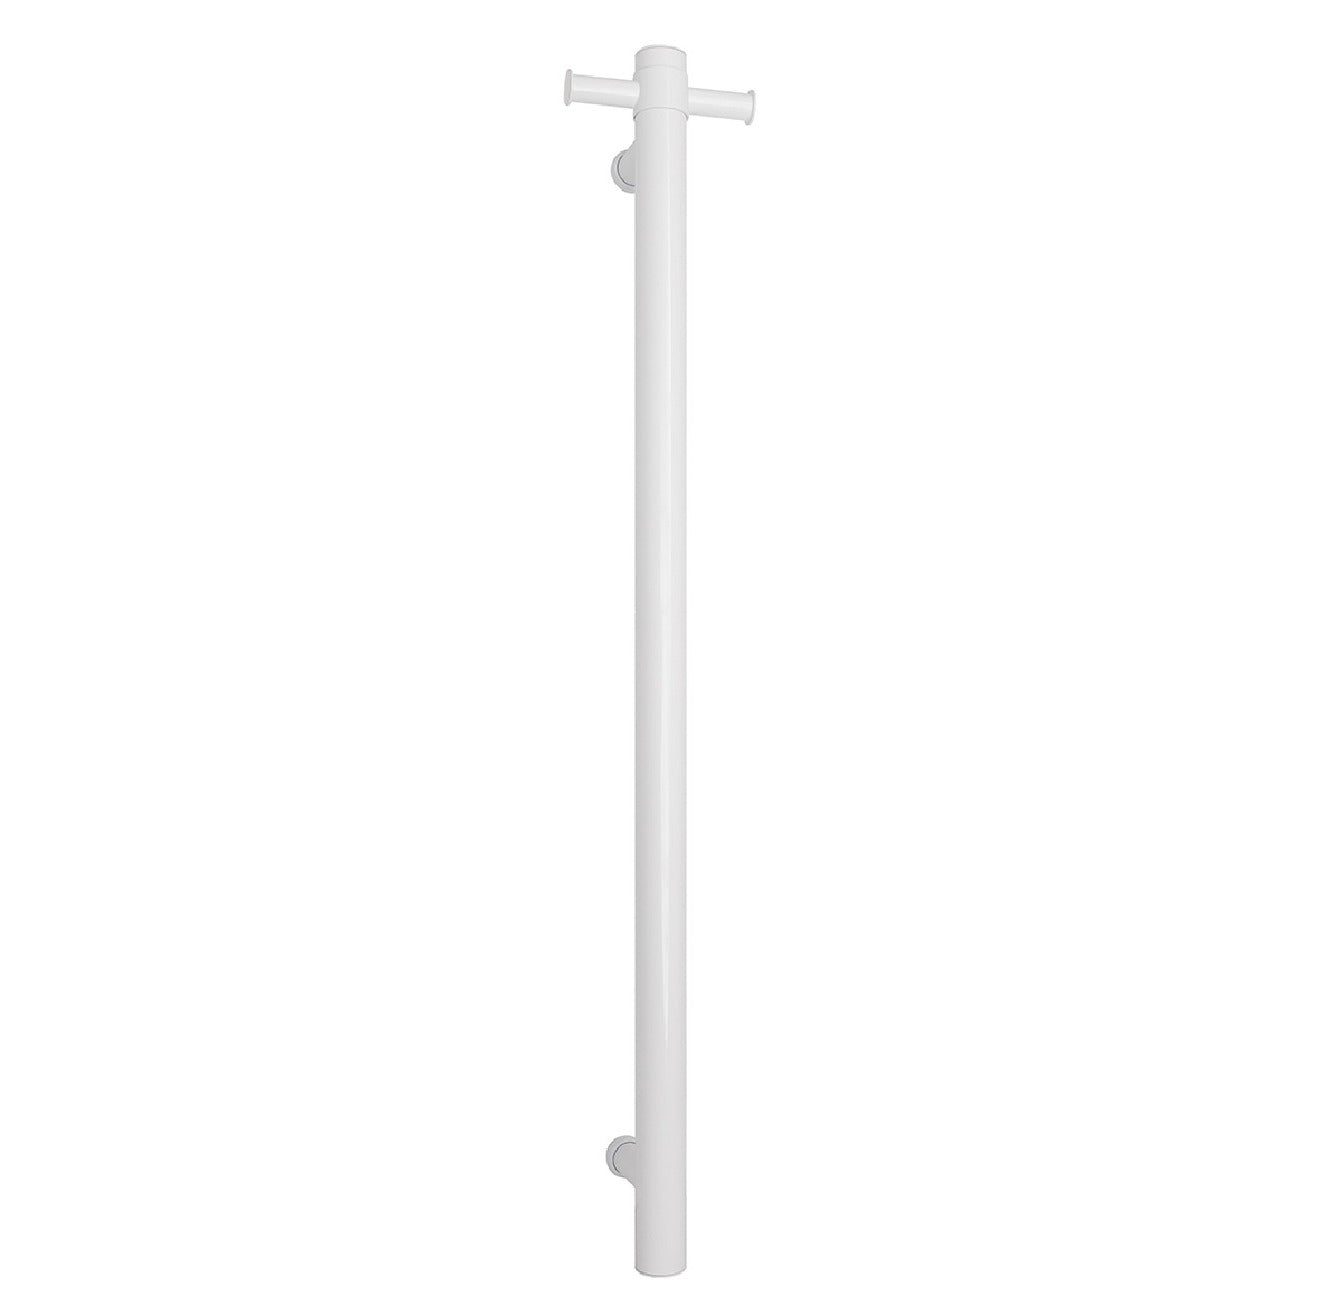 THERMOGROUP SATIN WHITE STRAIGHT ROUND VERTICAL SINGLE HEATED TOWEL RAIL 900MM